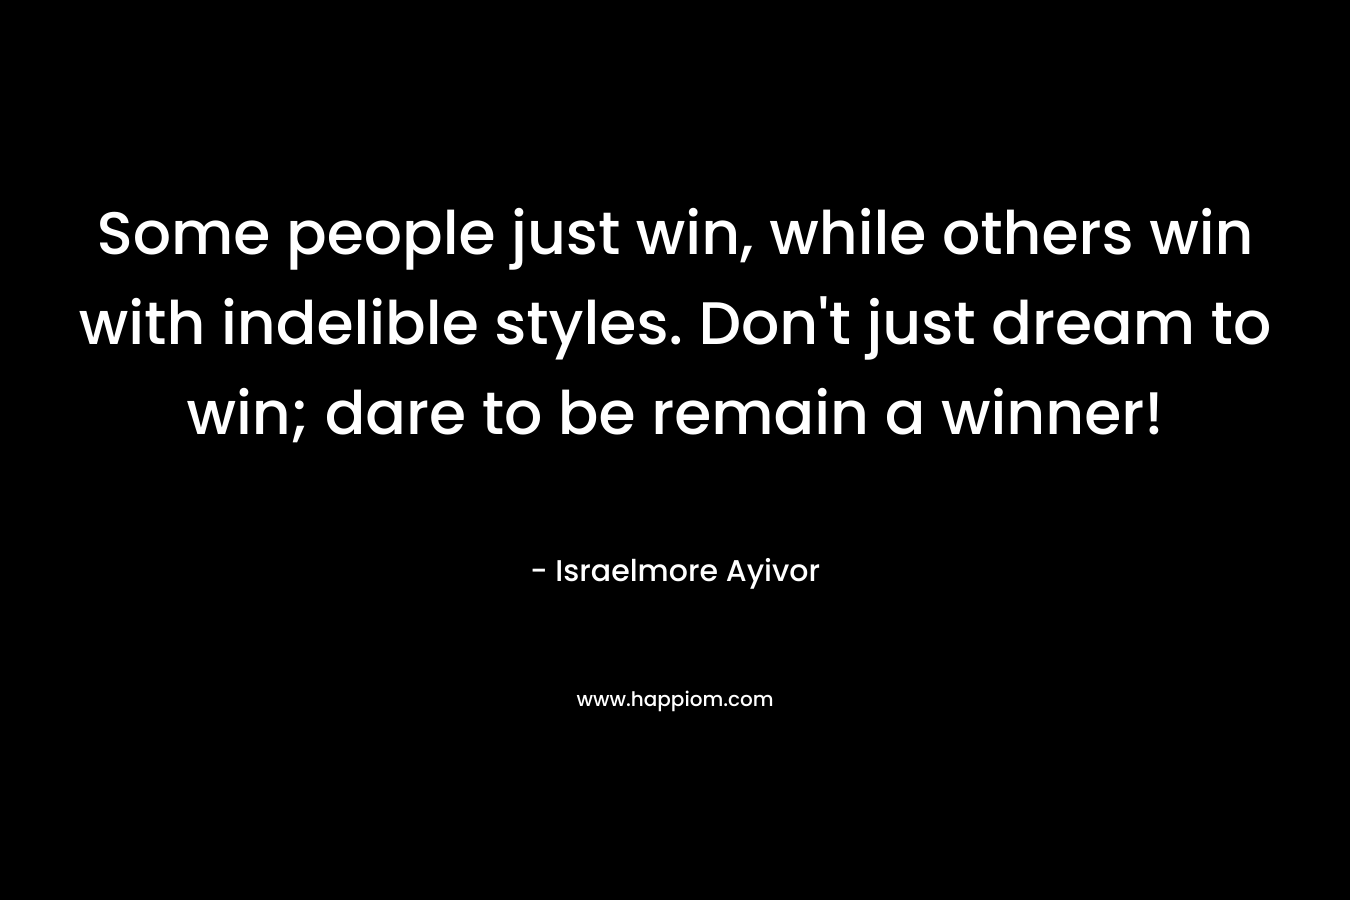 Some people just win, while others win with indelible styles. Don't just dream to win; dare to be remain a winner!